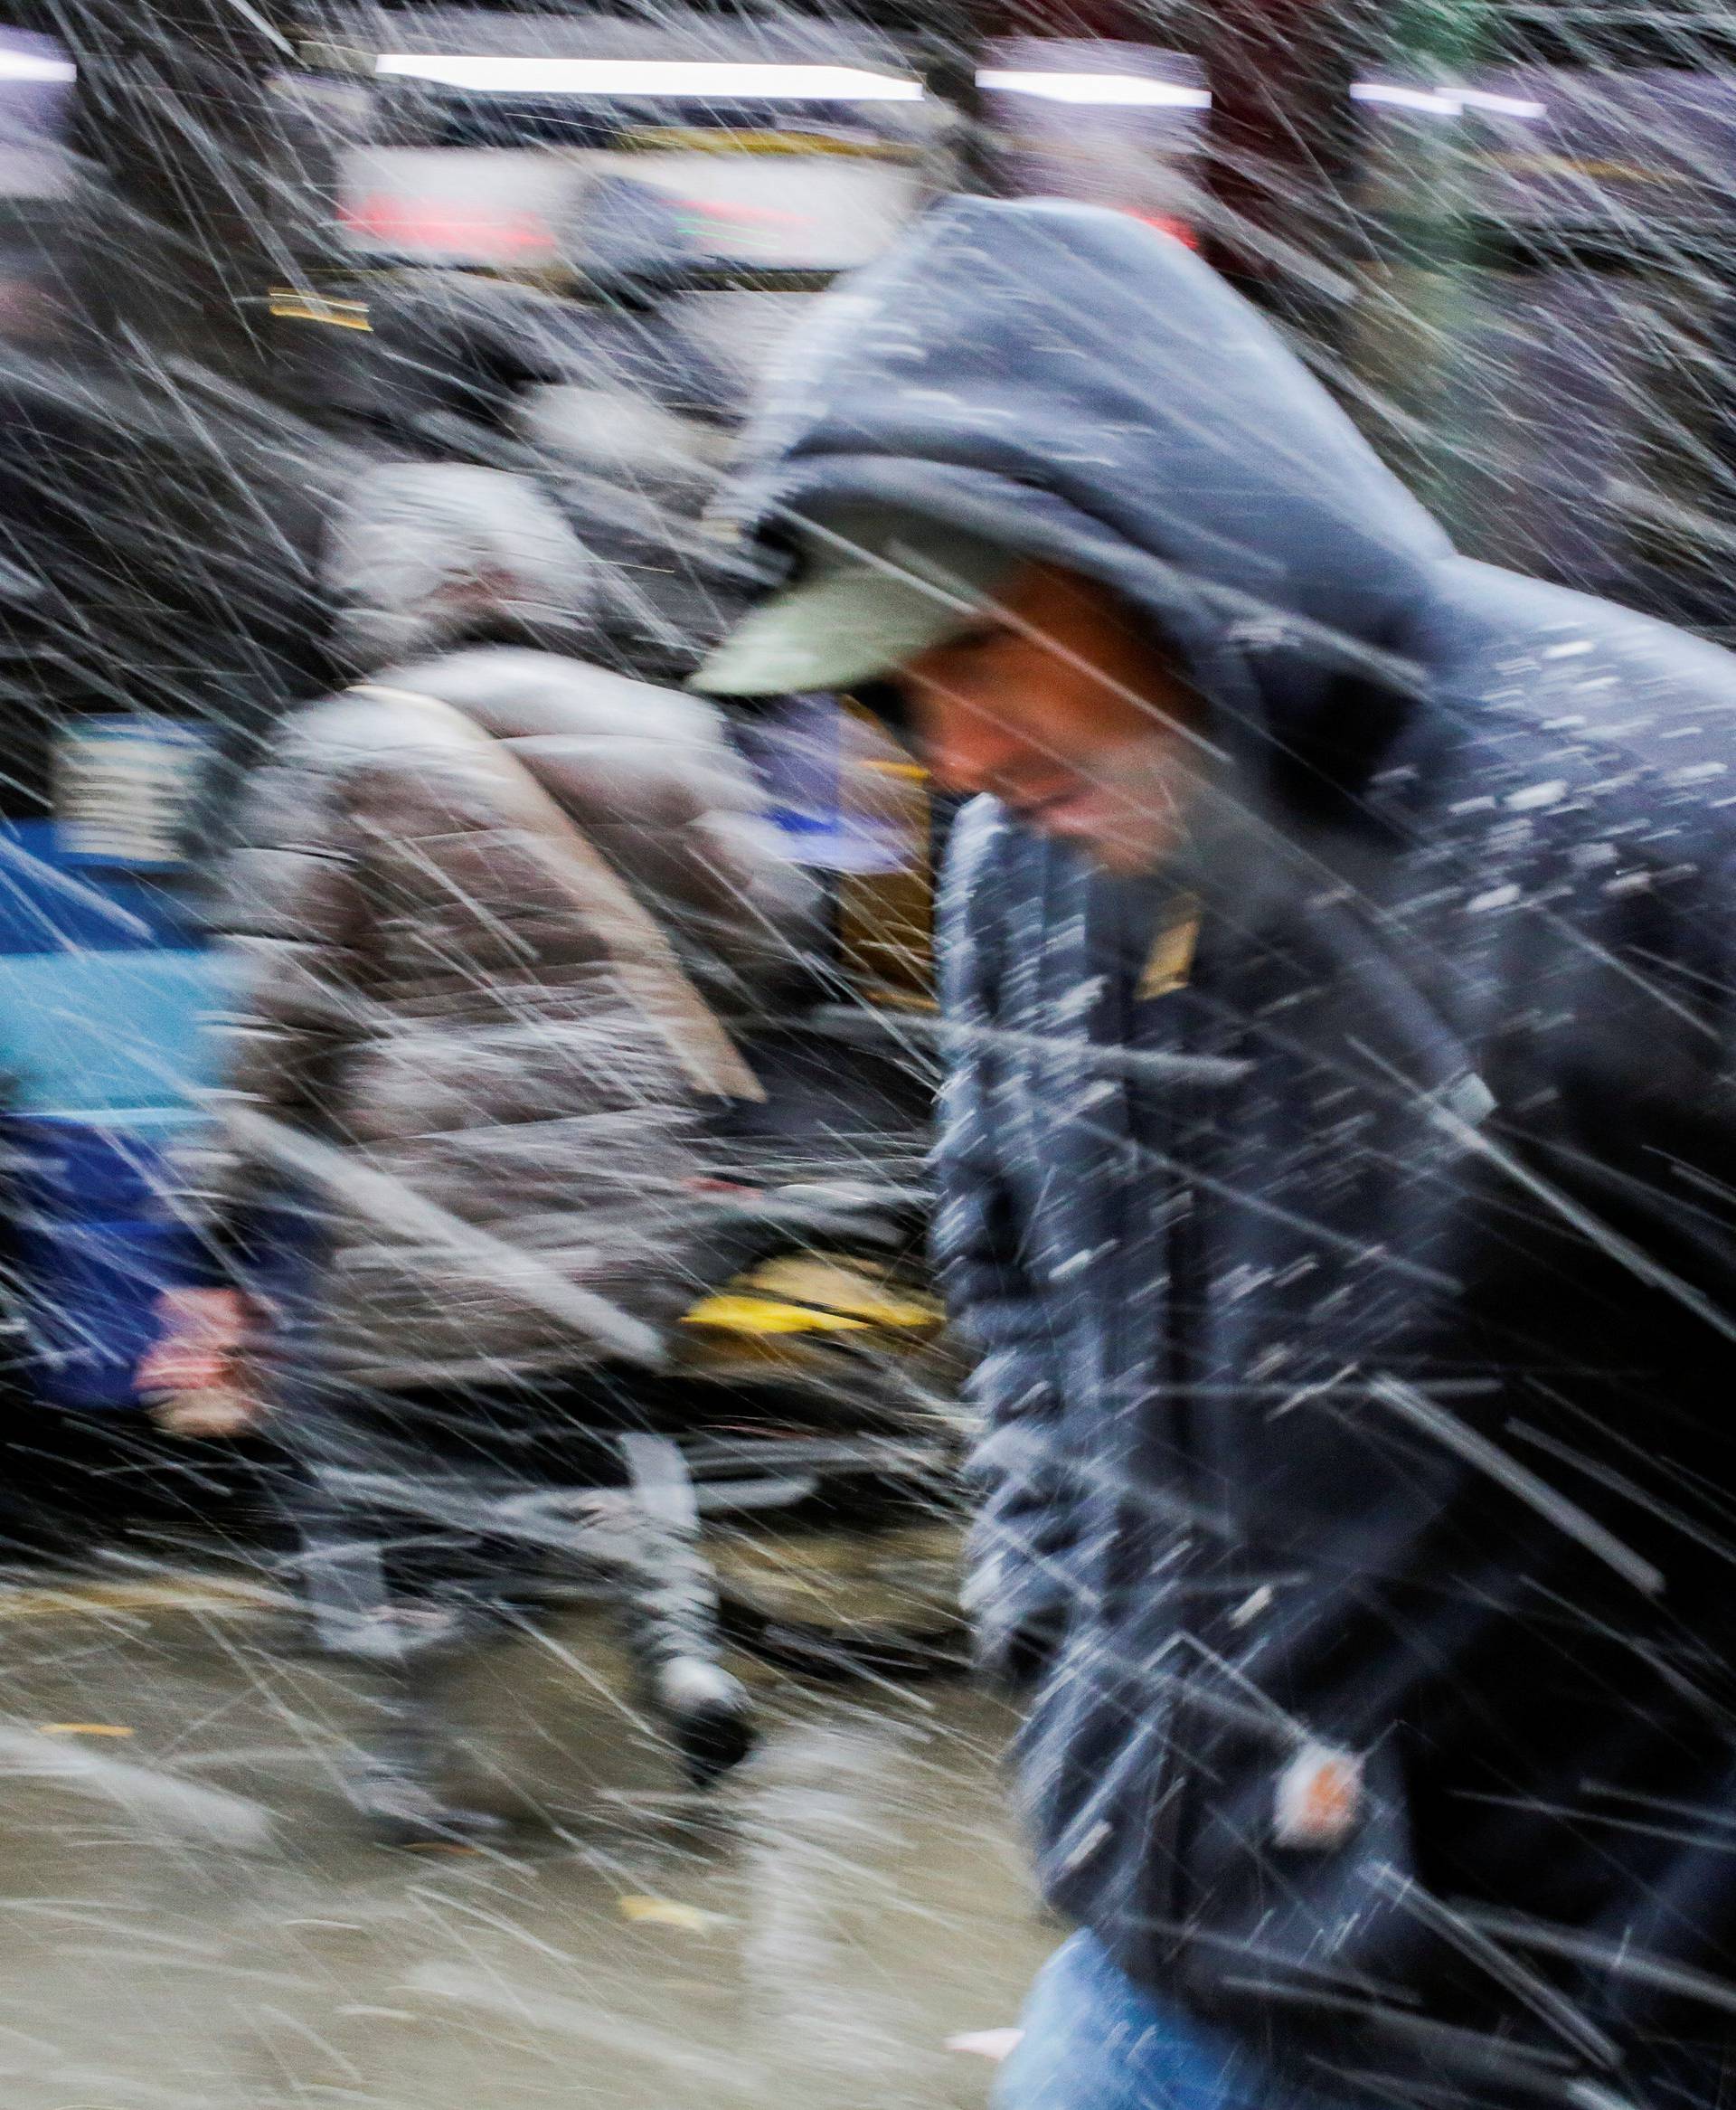 A man walks during a snowstorm in New York City, New York